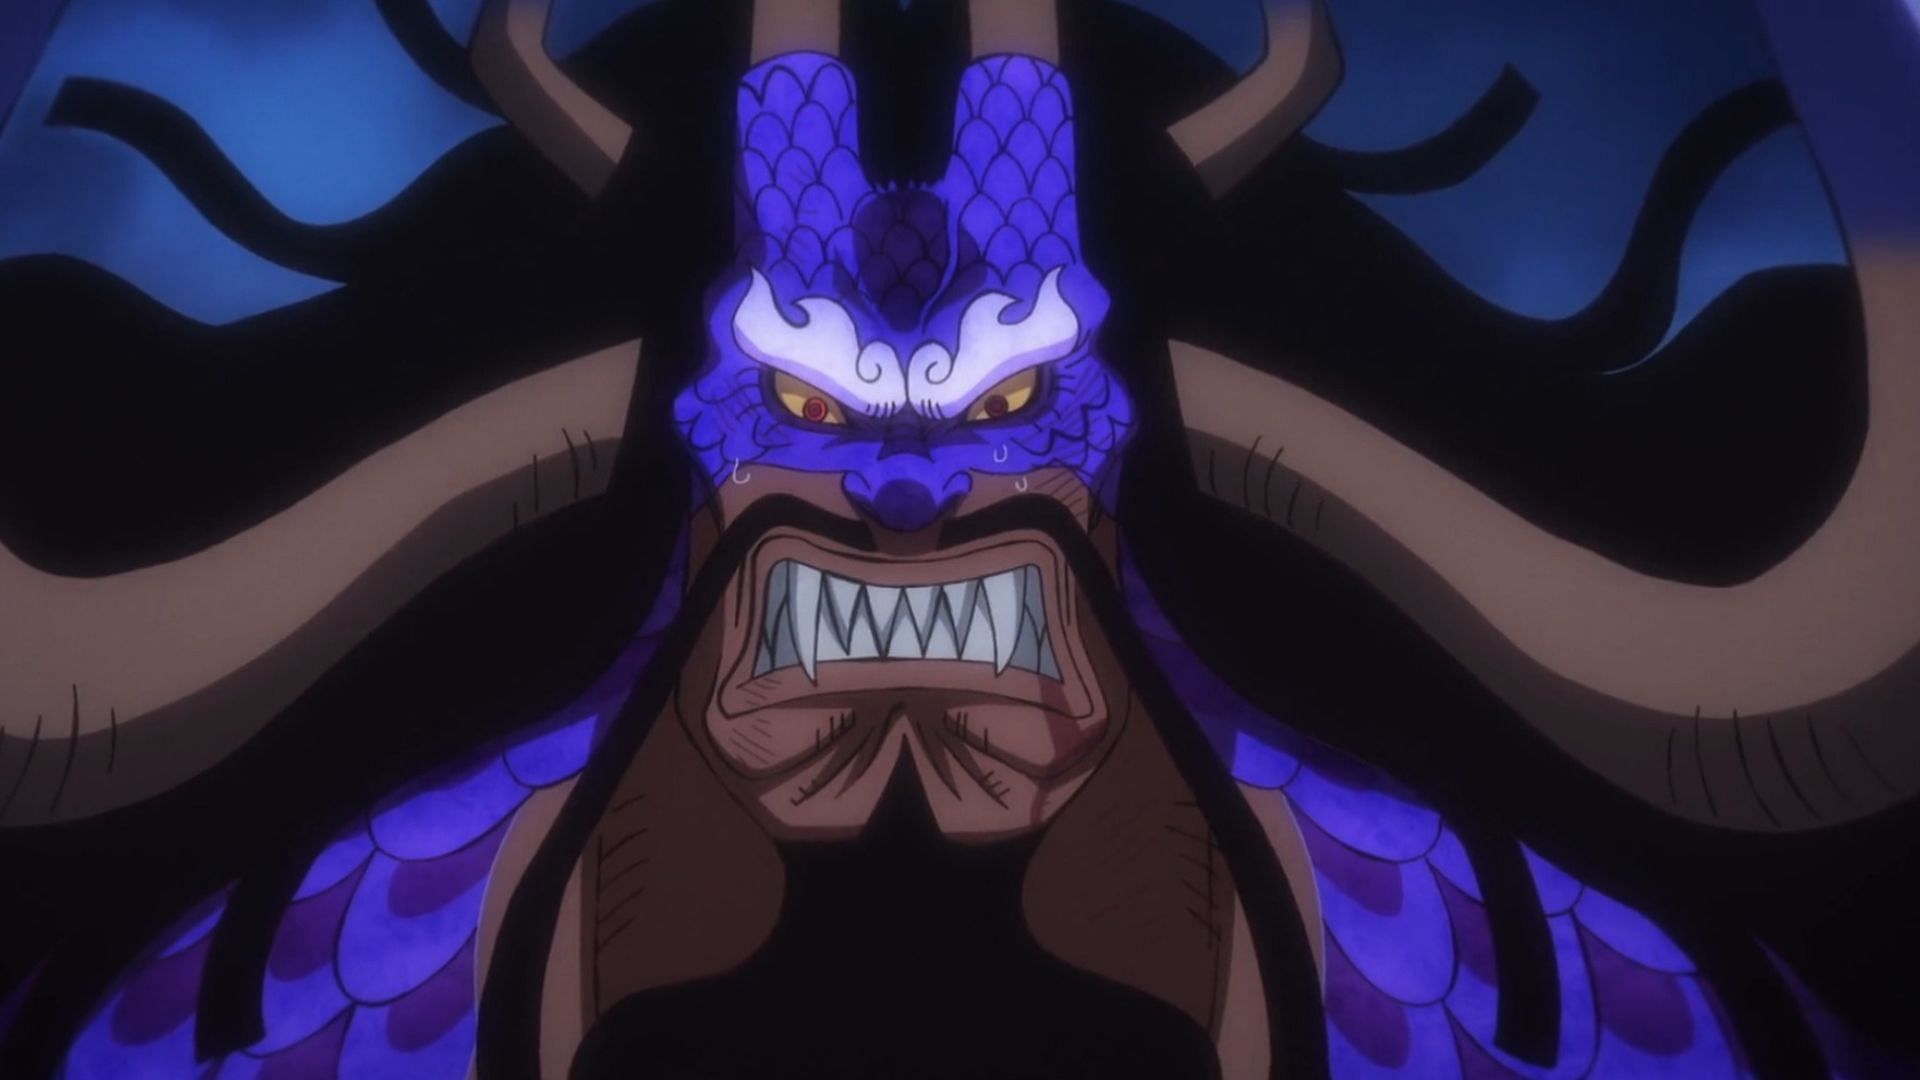 One Piece episode 1070: One Piece Episode 1070: Check release date